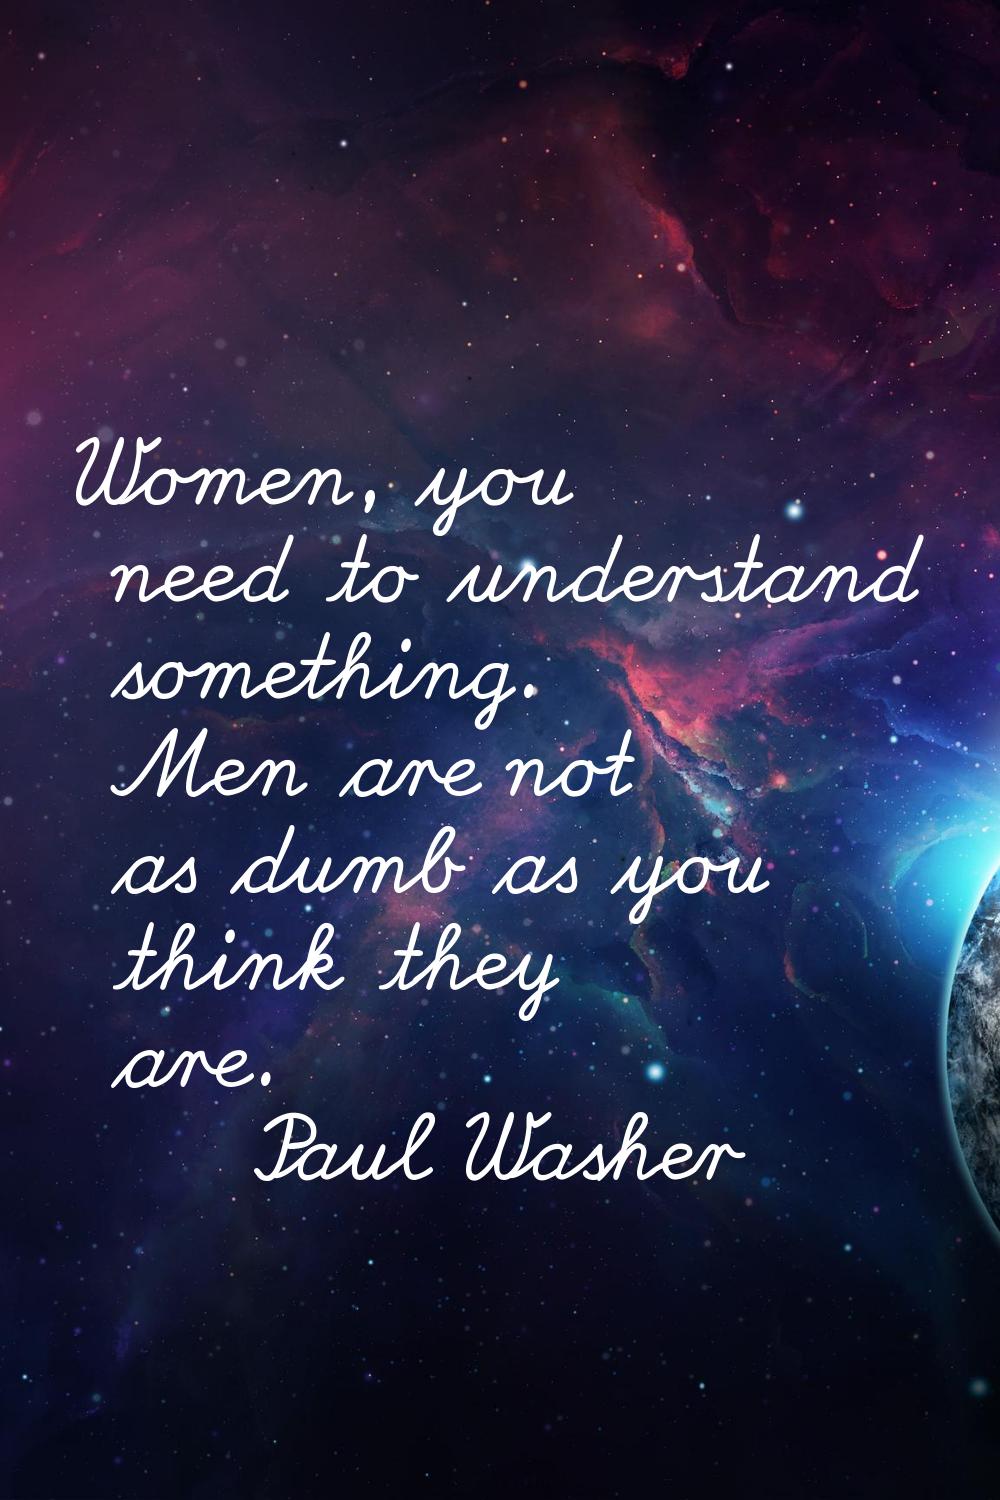 Women, you need to understand something. Men are not as dumb as you think they are.